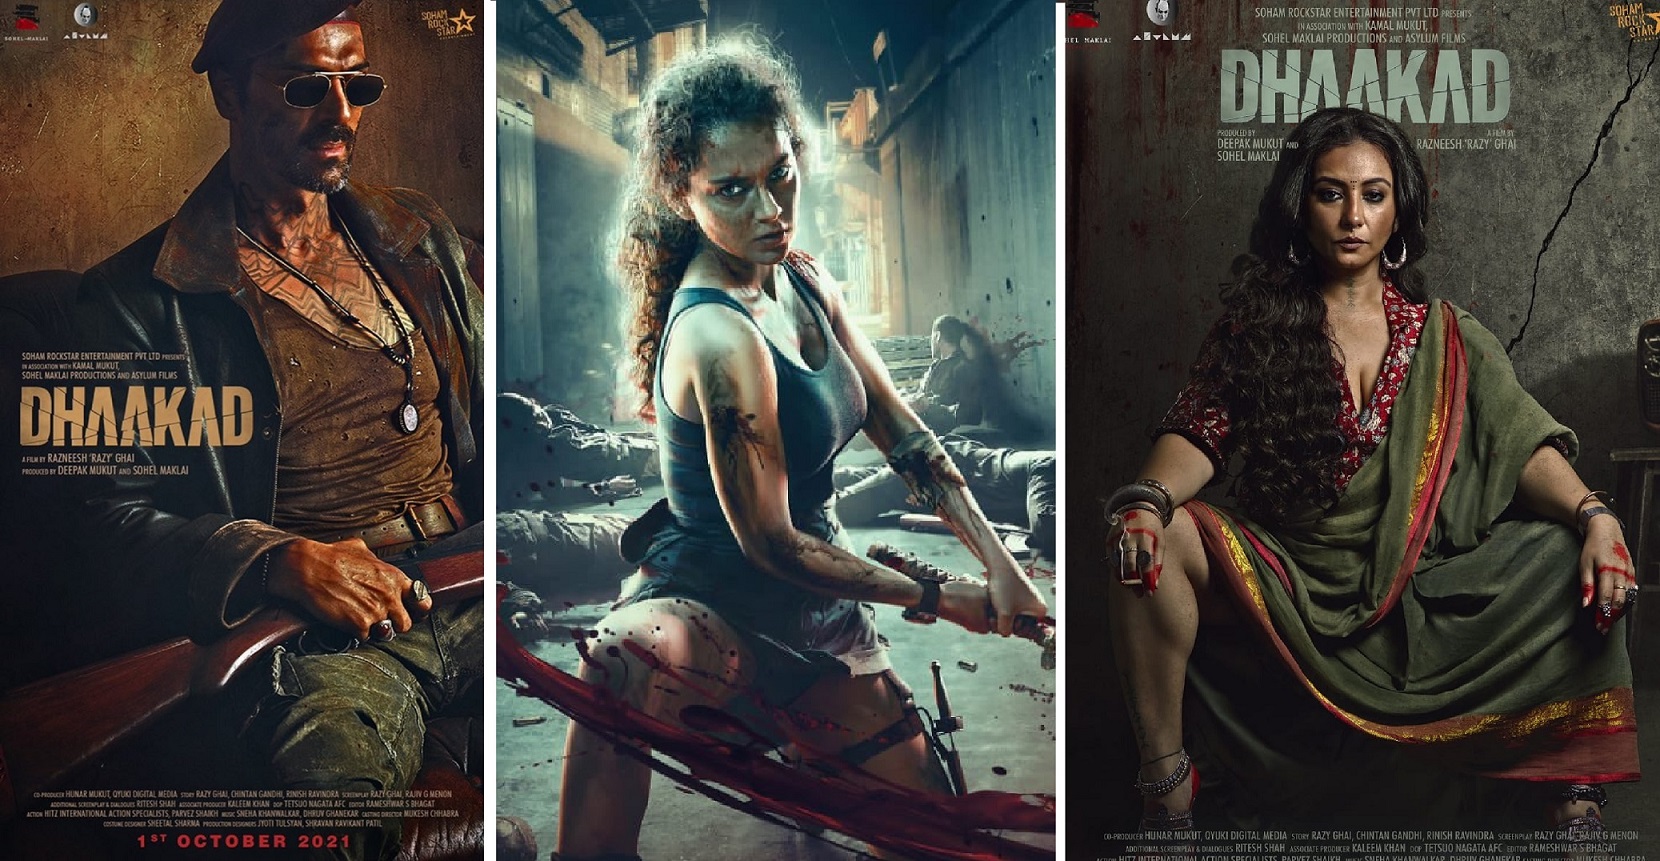 ‘First-Look’ Posters From Dhaakad featuring Kangana Ranaut, Arjun Rampal and Divya Dutta Are Here!